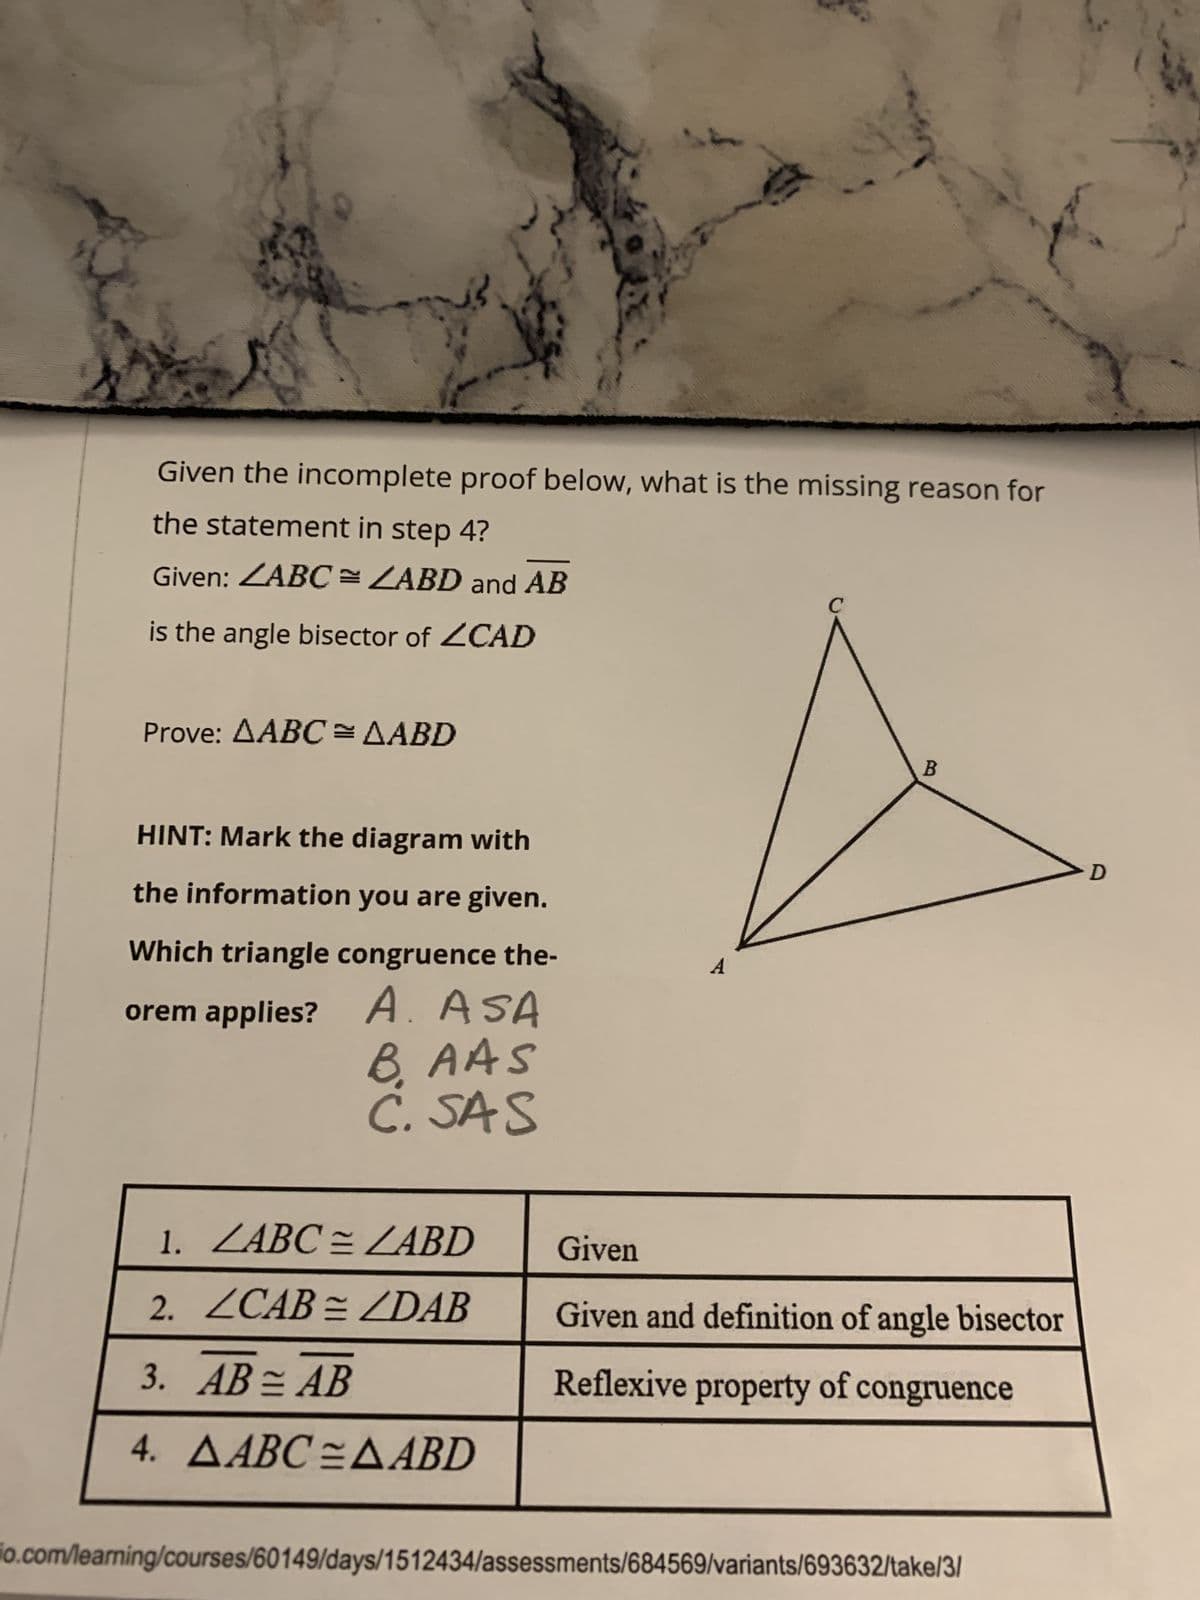 Given the incomplete proof below, what is the missing reason for
the statement in step 4?
Given: ZABC= ZABD and AB
is the angle bisector of ZCAD
Prove: AABC = AABD
HINT: Mark the diagram with
the information you are given.
Which triangle congruence the-
orem applies? A. ASA
BAAS
C. SAS
Sc
1. ZABC = LABD
2. ZCAB = ZDAB
3. AB = AB
4. AABC=AABD
B
Given
Given and definition of angle bisector
Reflexive property of congruence
io.com/learning/courses/60149/days/1512434/assessments/684569/variants/693632/take/3/
D